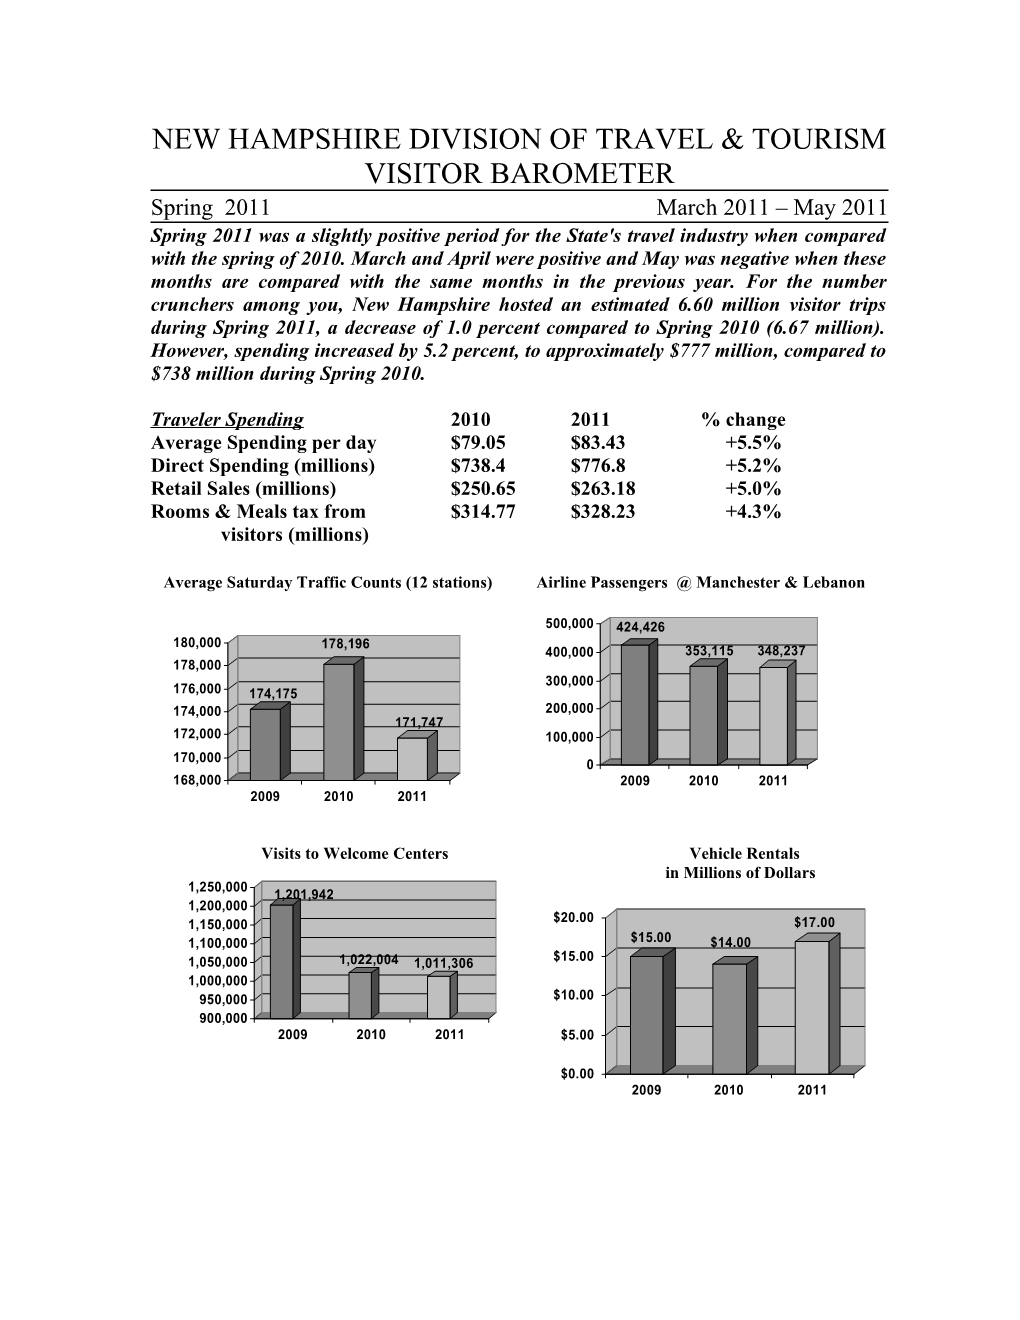 New Hampshire Division of Travel and Tourism Visitor Barometer